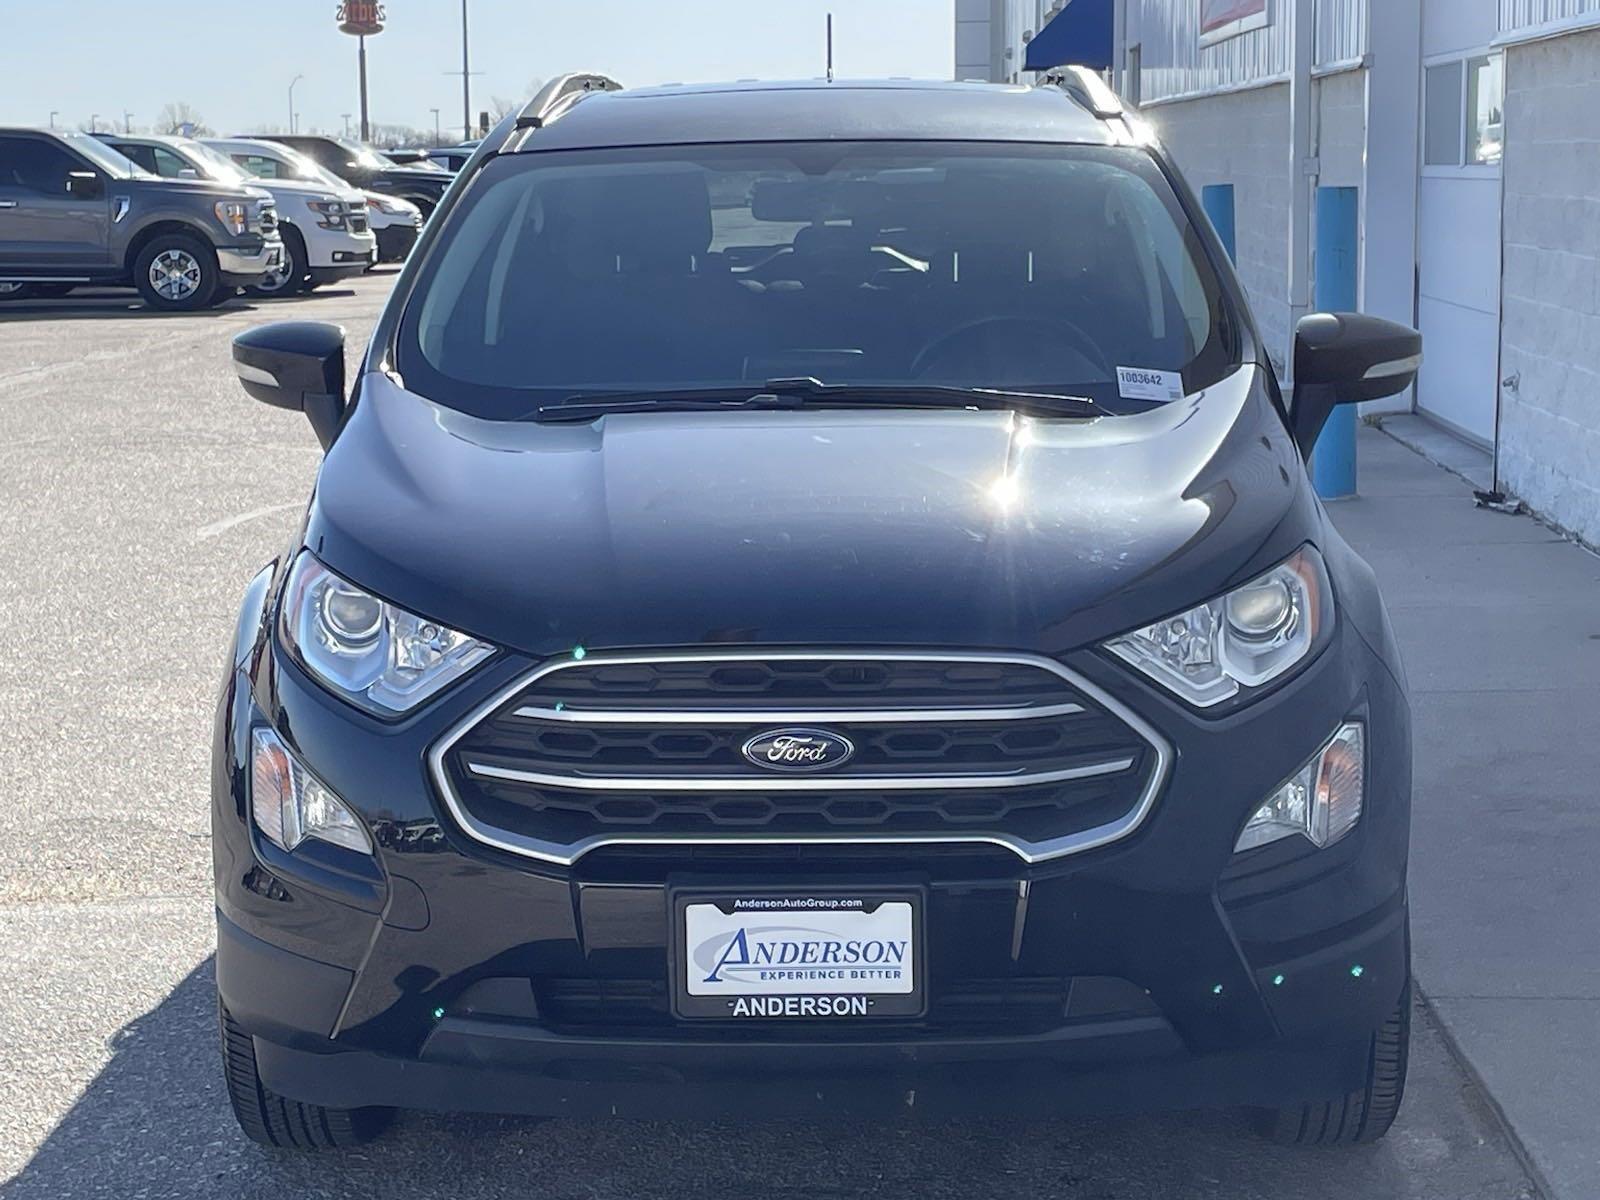 Used 2018 Ford EcoSport SE Sport Utility for sale in Lincoln NE